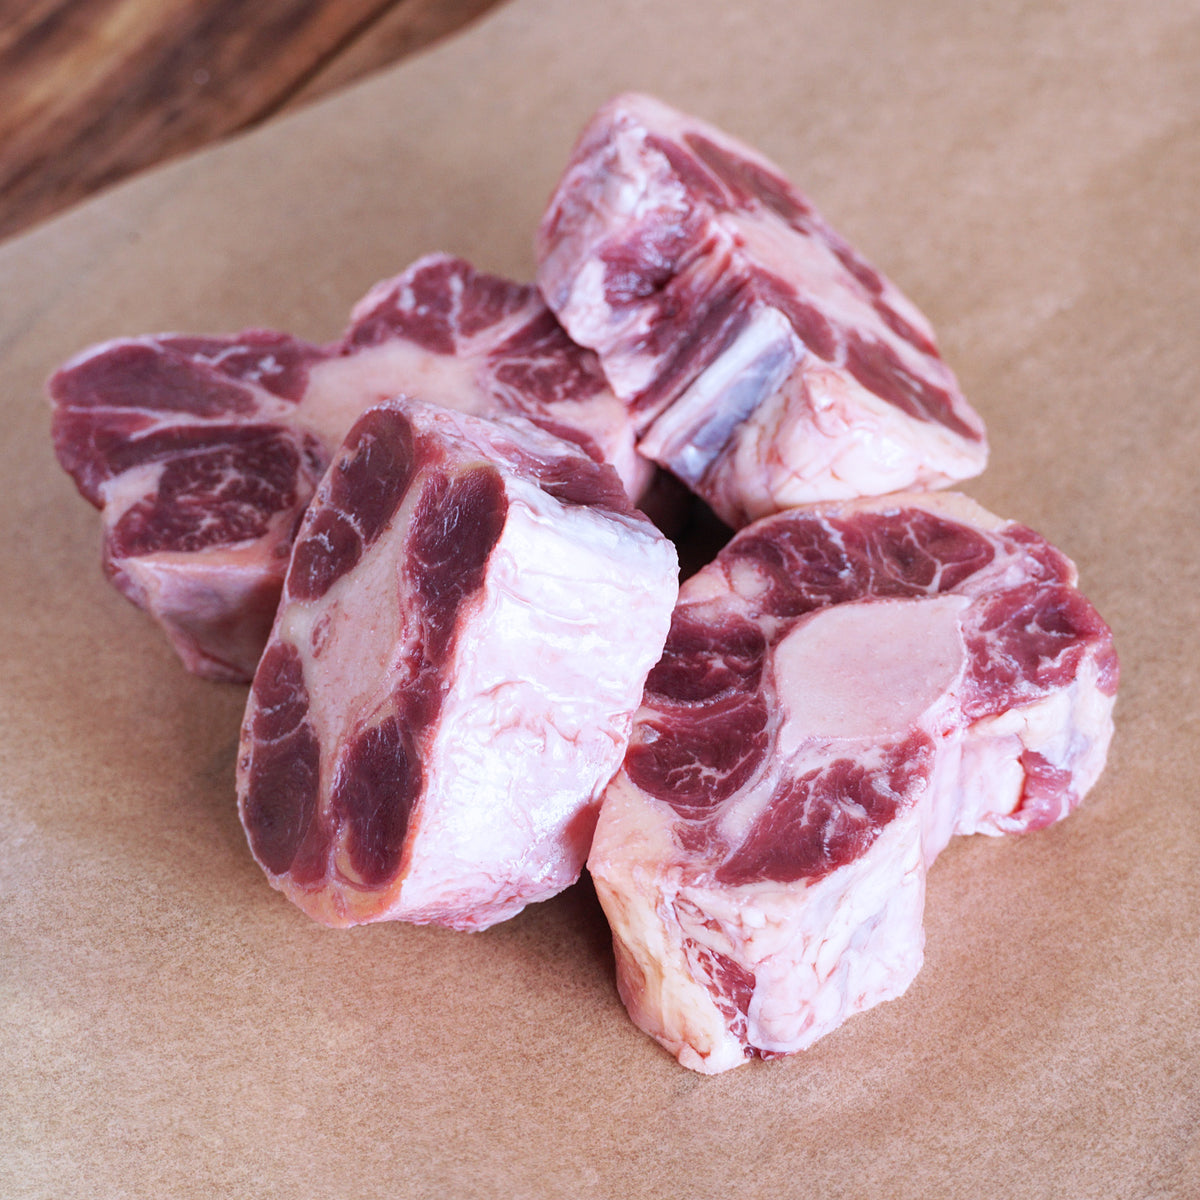 Grass-Fed Beef Tail Cuts / Oxtails for Bone Broth from Australia (500g) - Horizon Farms